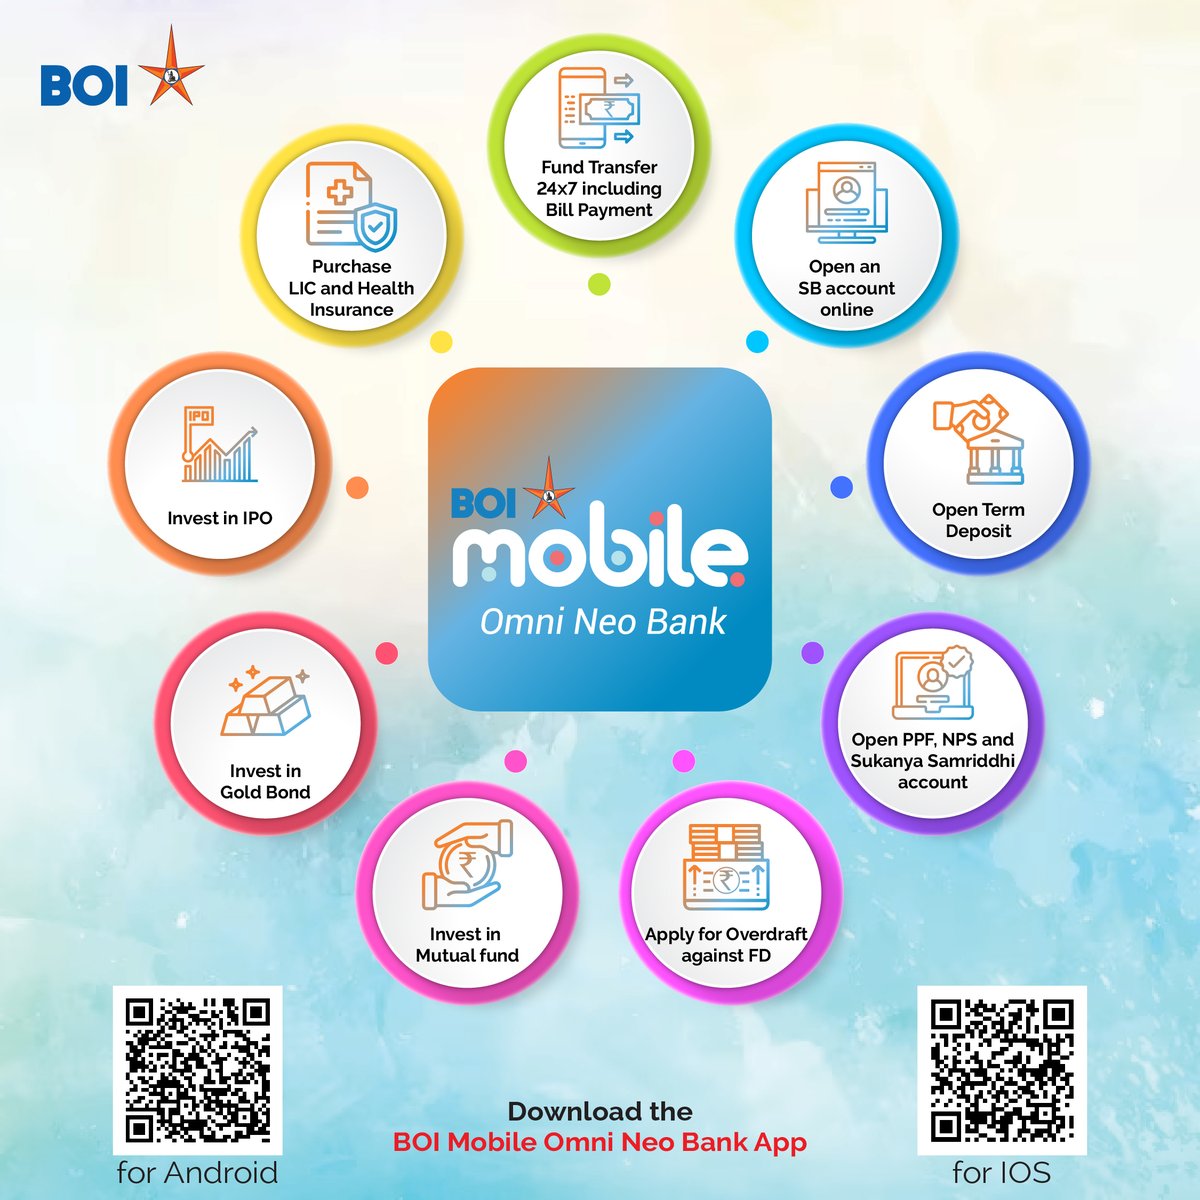 Instant Banking, Effortless Living! Download the BOI Mobile Omni Neo Bank App to enjoy features like account management, quick payments, transaction history, and more. No queues, just convenience! Download the app now: Google Play Store: bit.ly/44Mdt2Y App store: